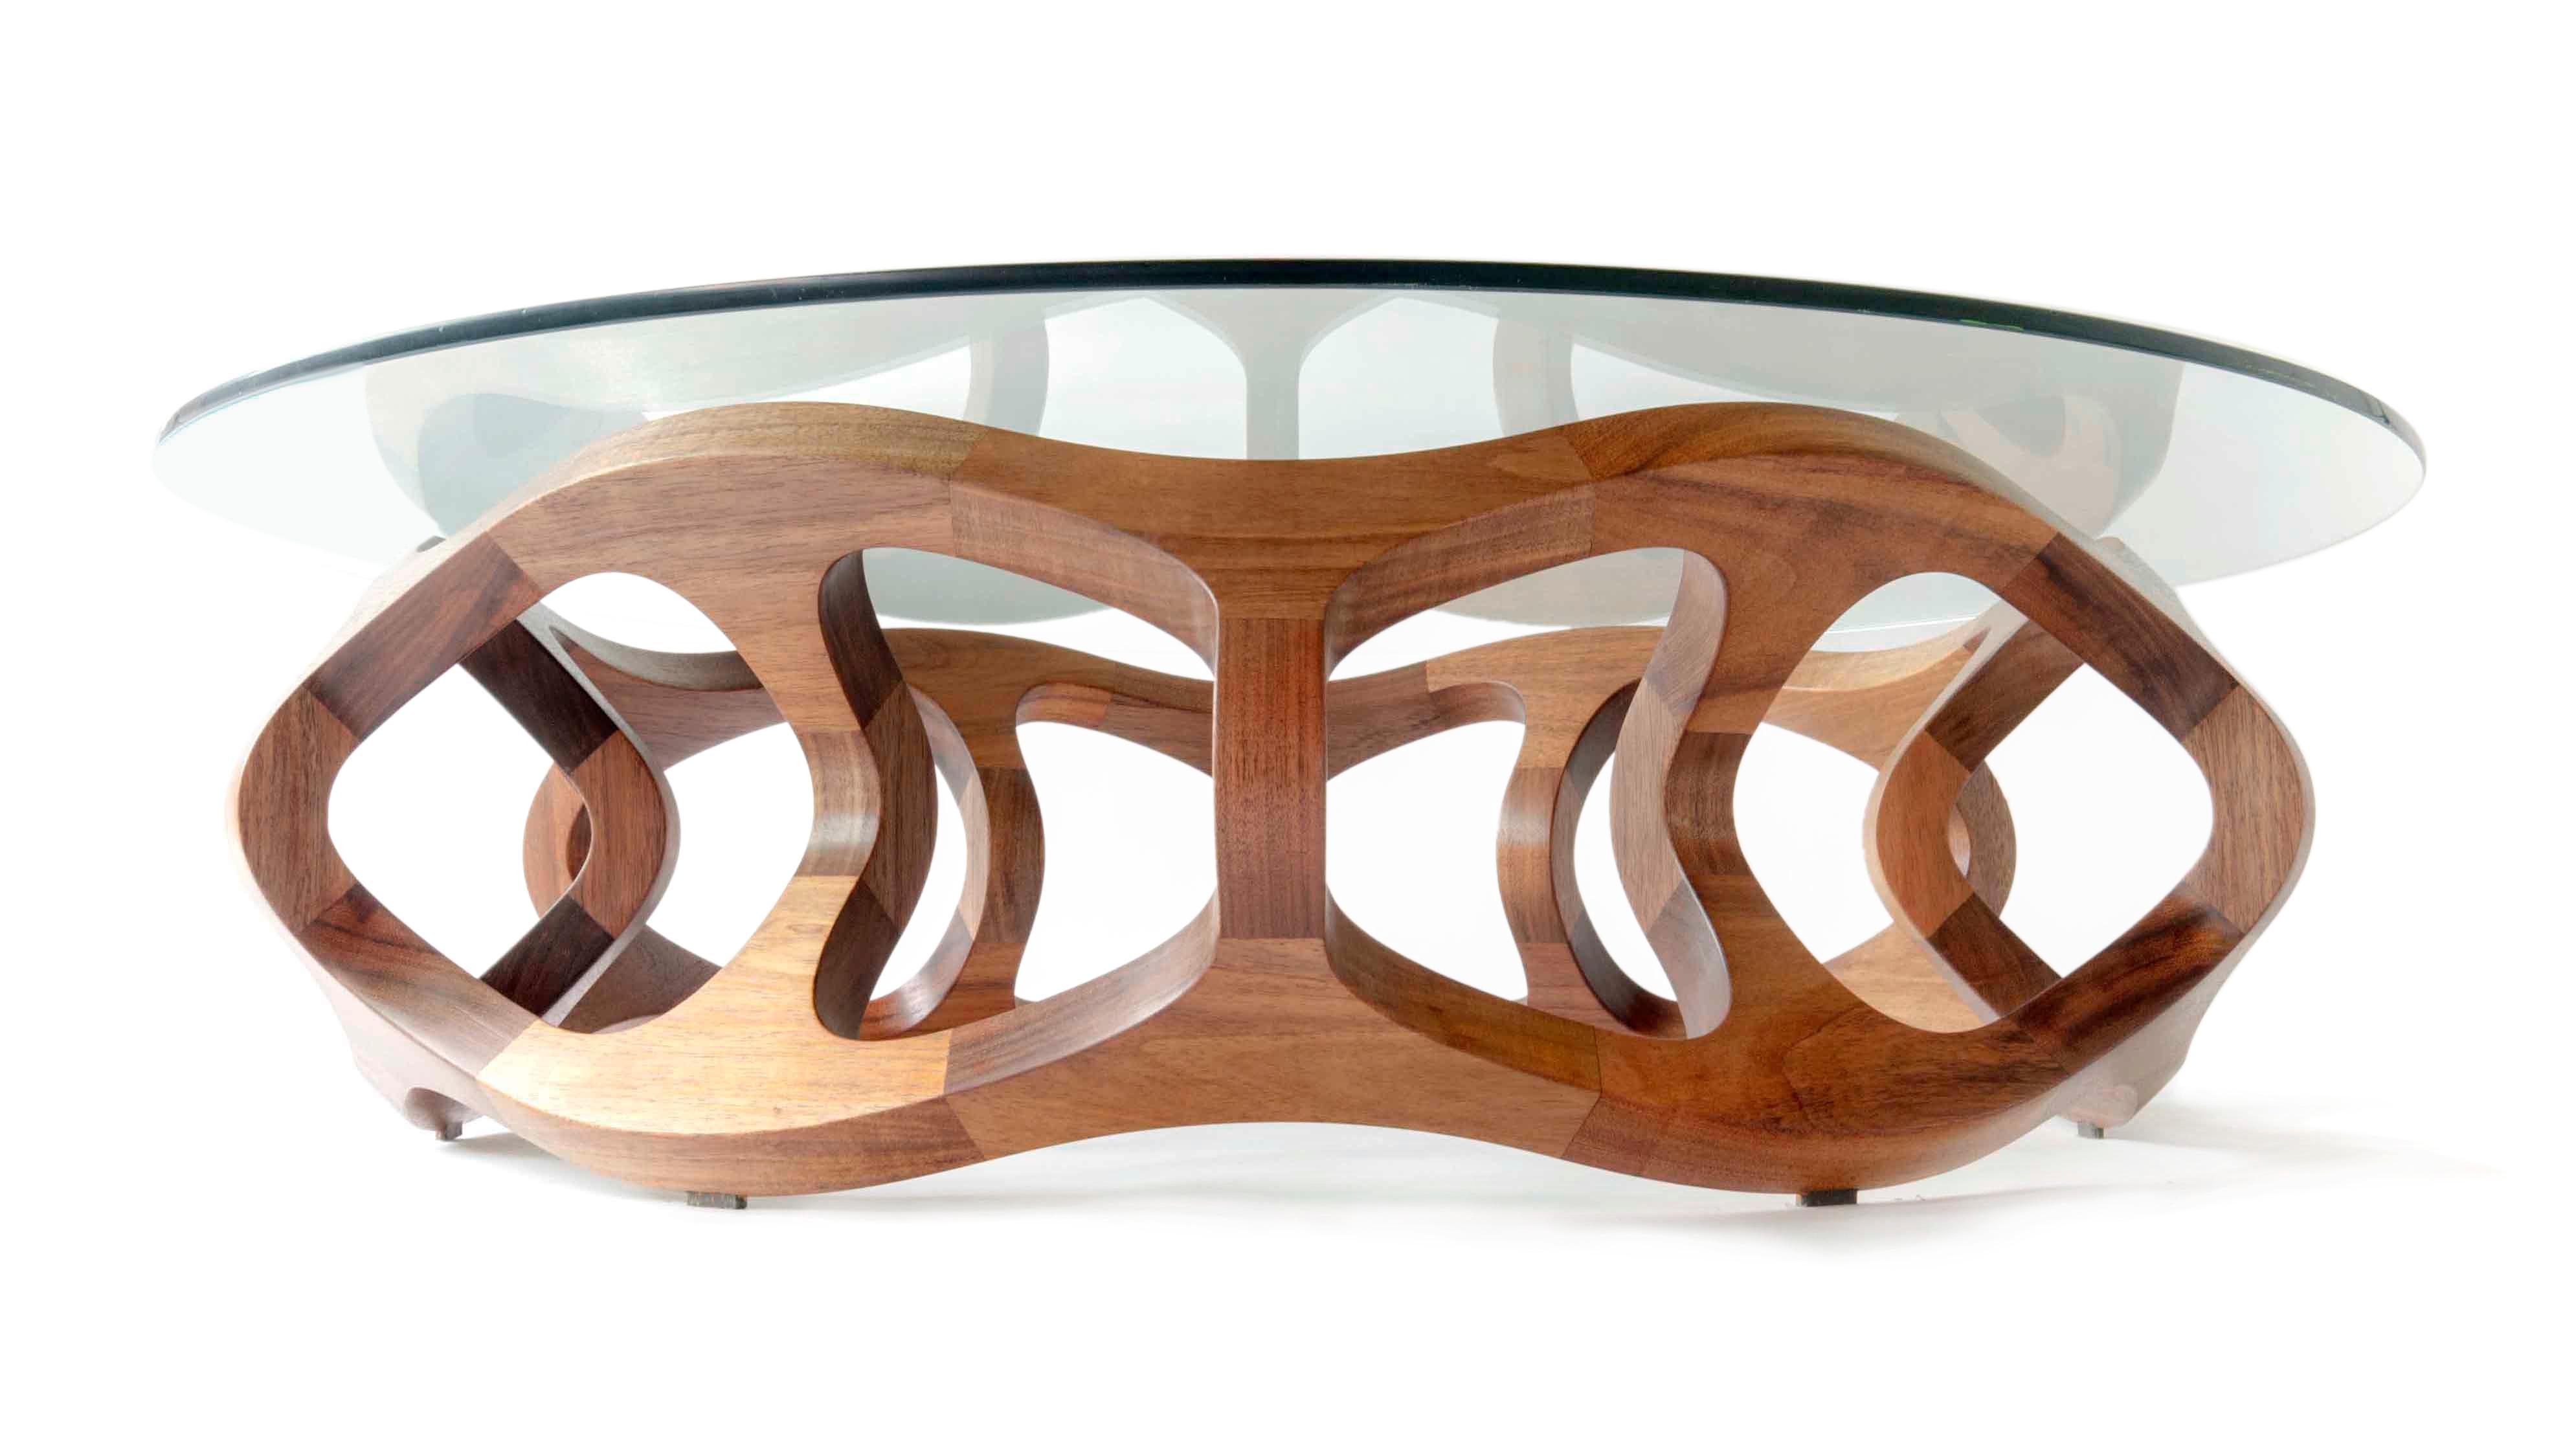 Toro G6, Geometric Sculptural Center Table Made of Solid Wood by Pedro Cerisola For Sale 1